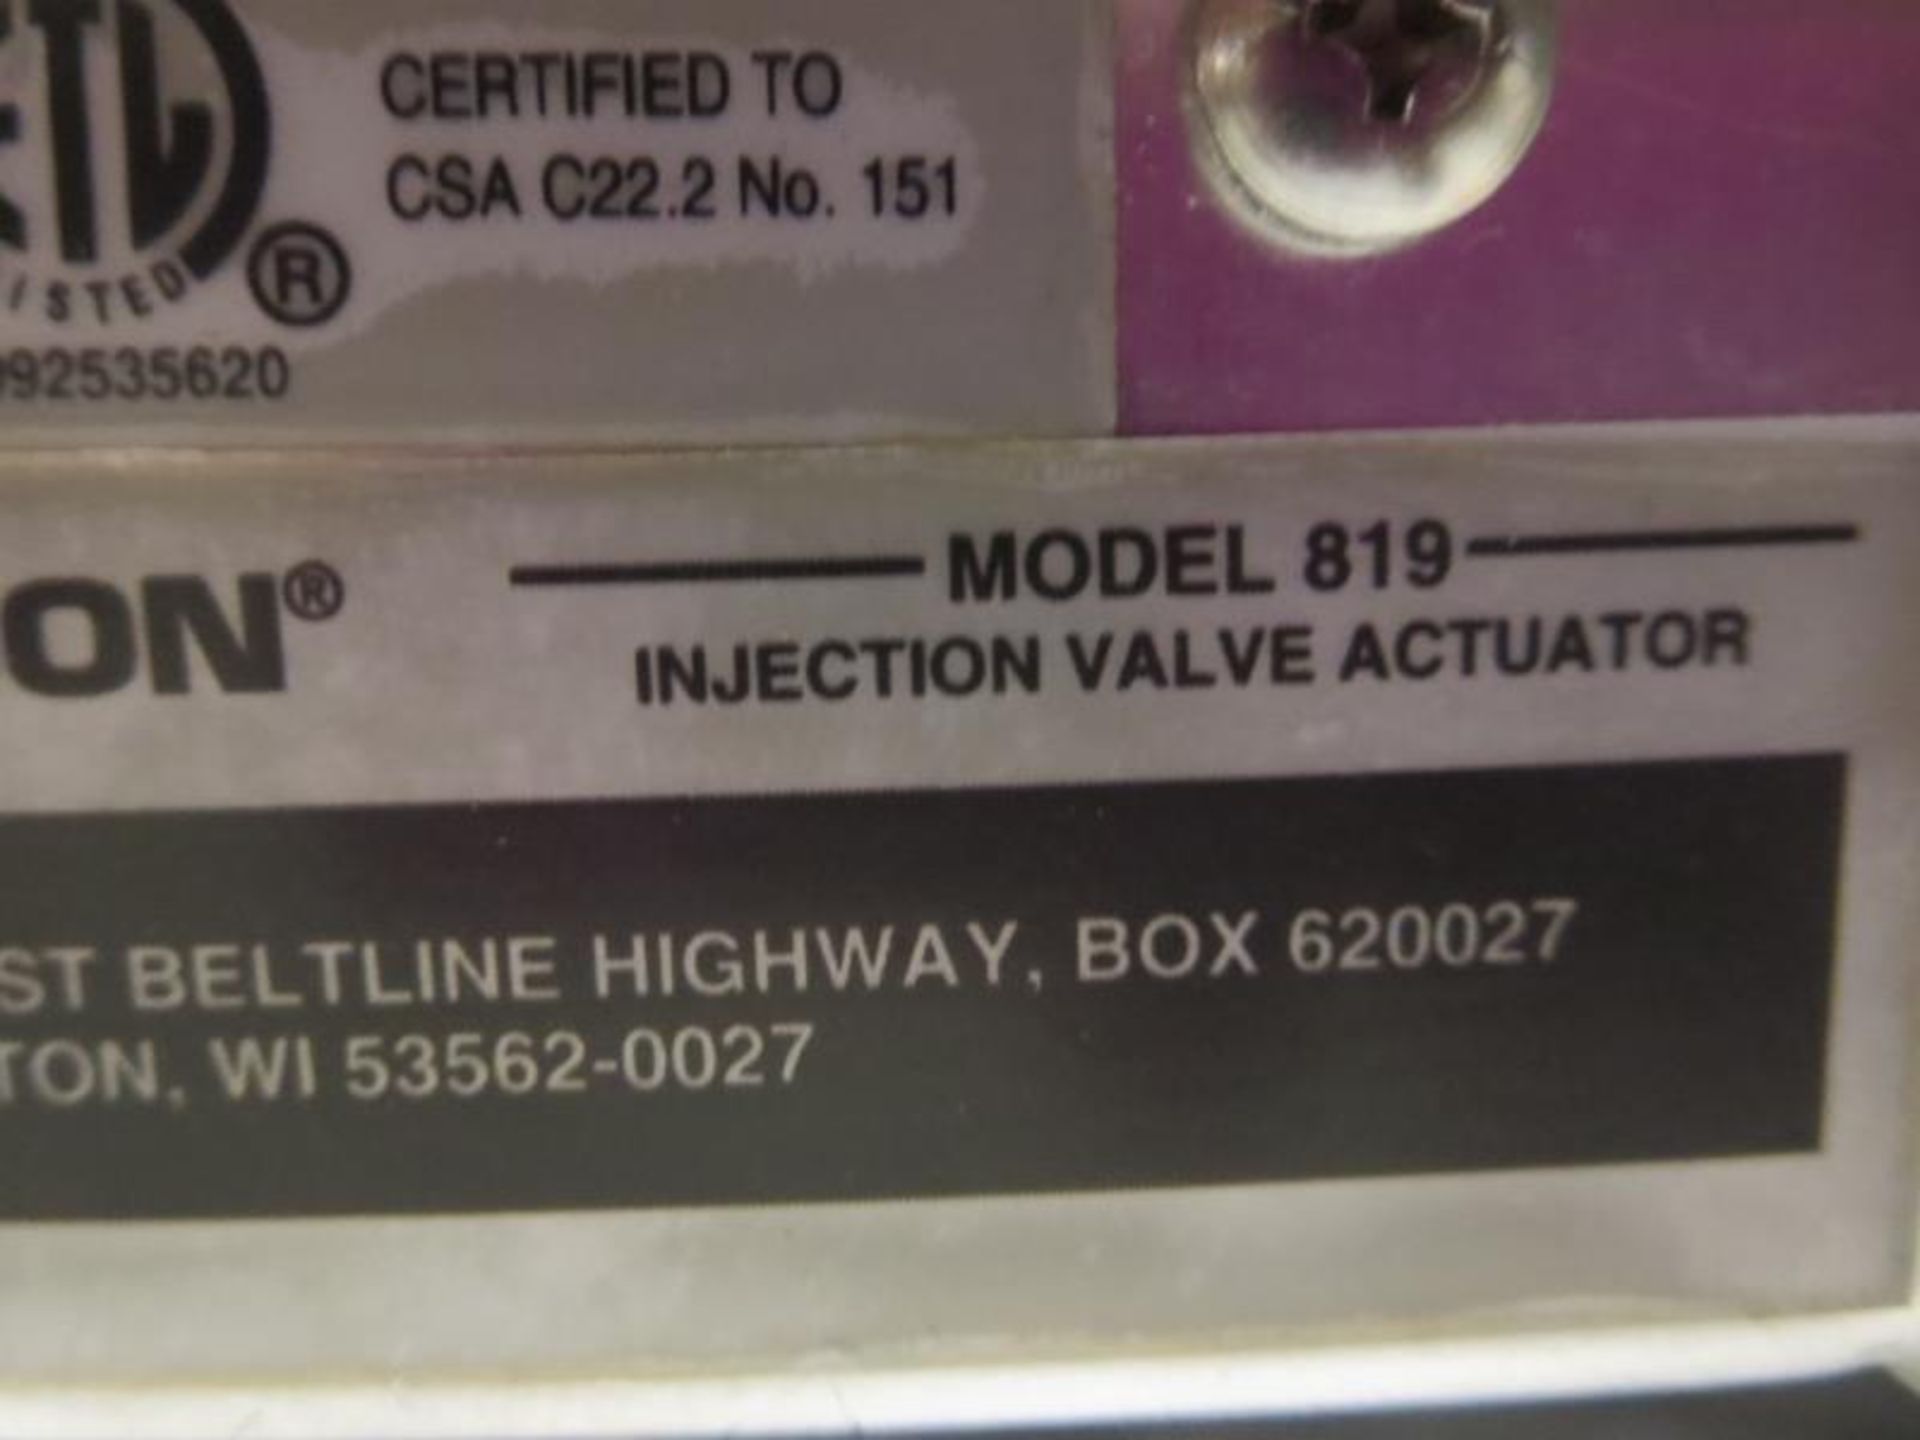 Gilson 619 Injection Valve Actuator - Image 3 of 3